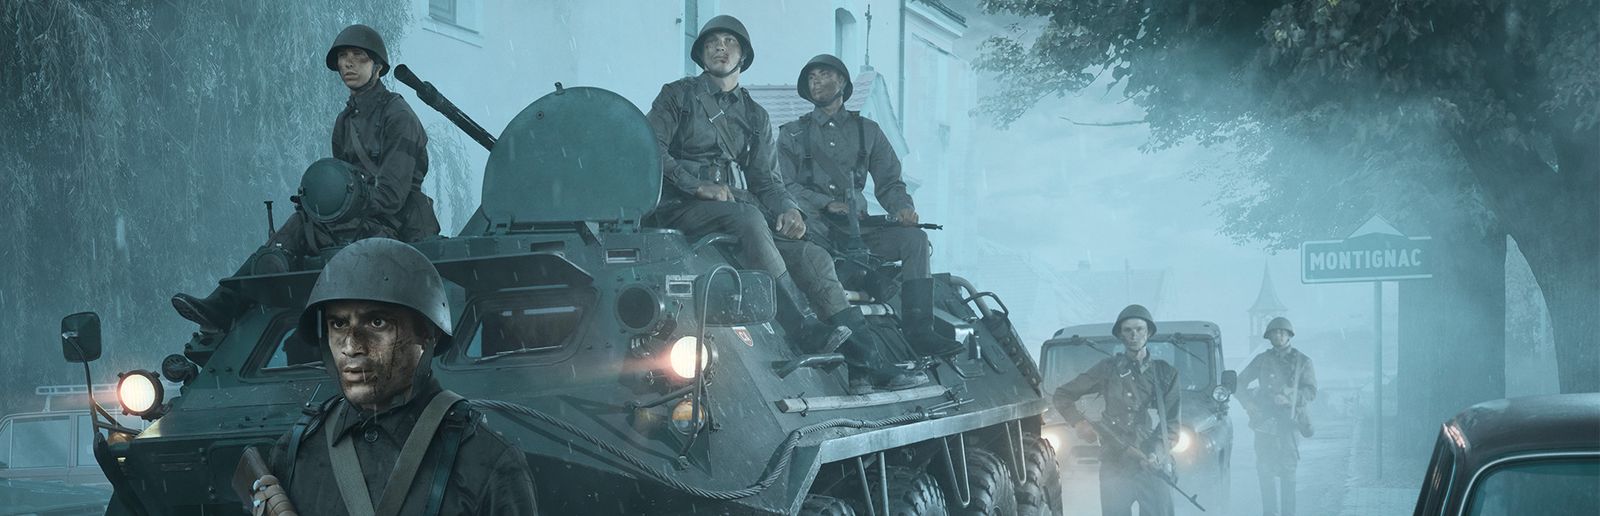 Soldiers sitting on a tank as they proceed through a town.